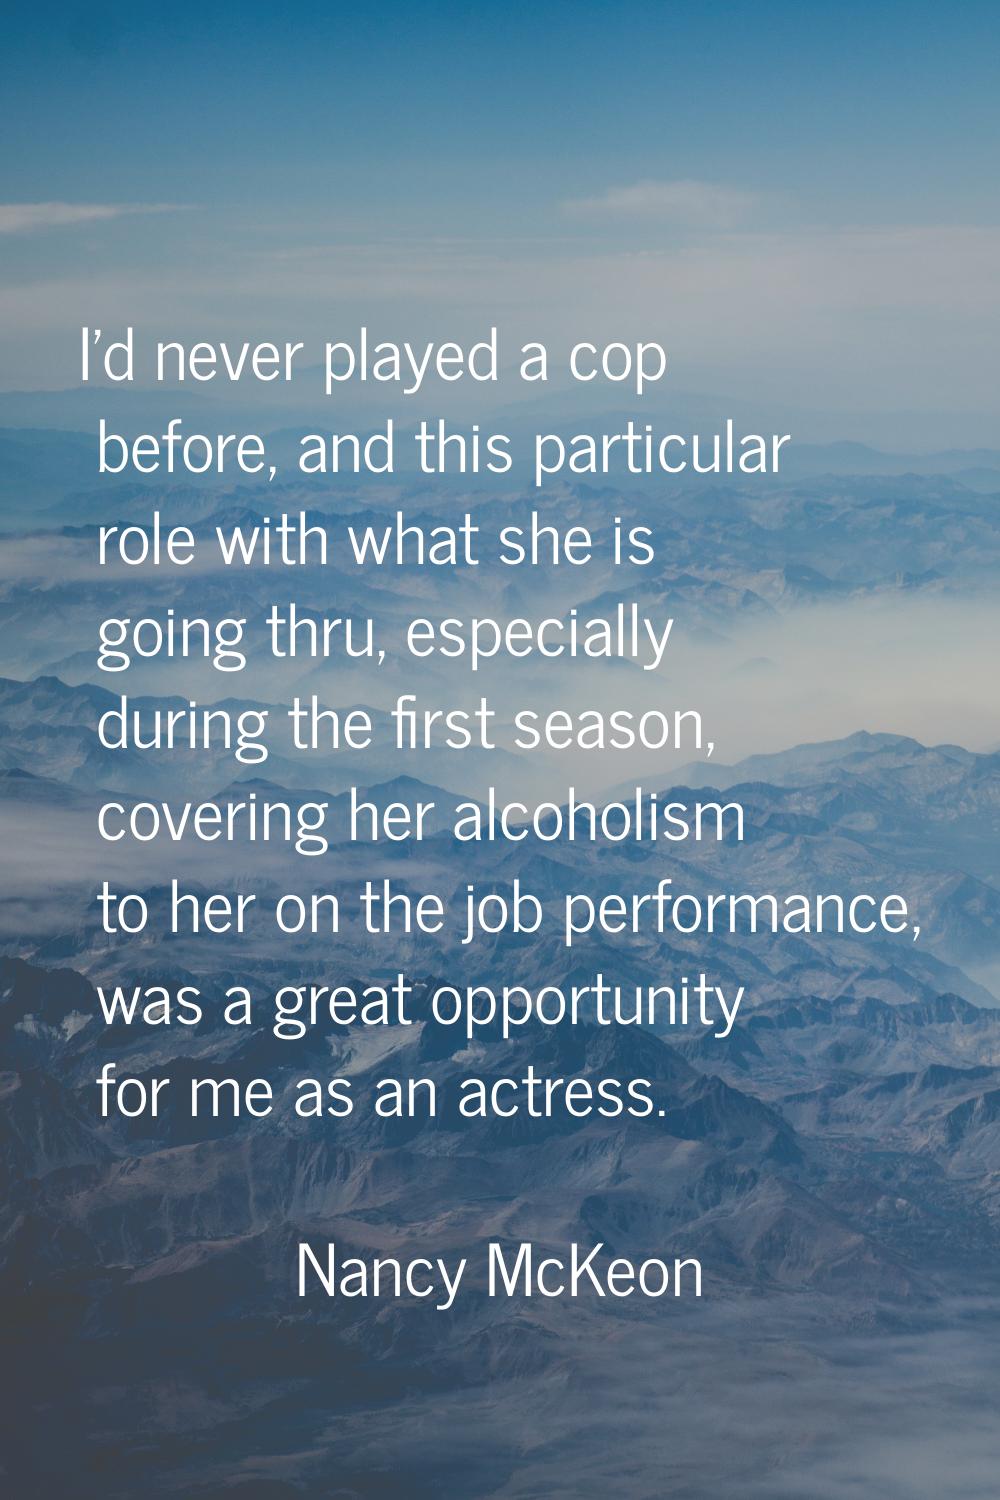 I'd never played a cop before, and this particular role with what she is going thru, especially dur